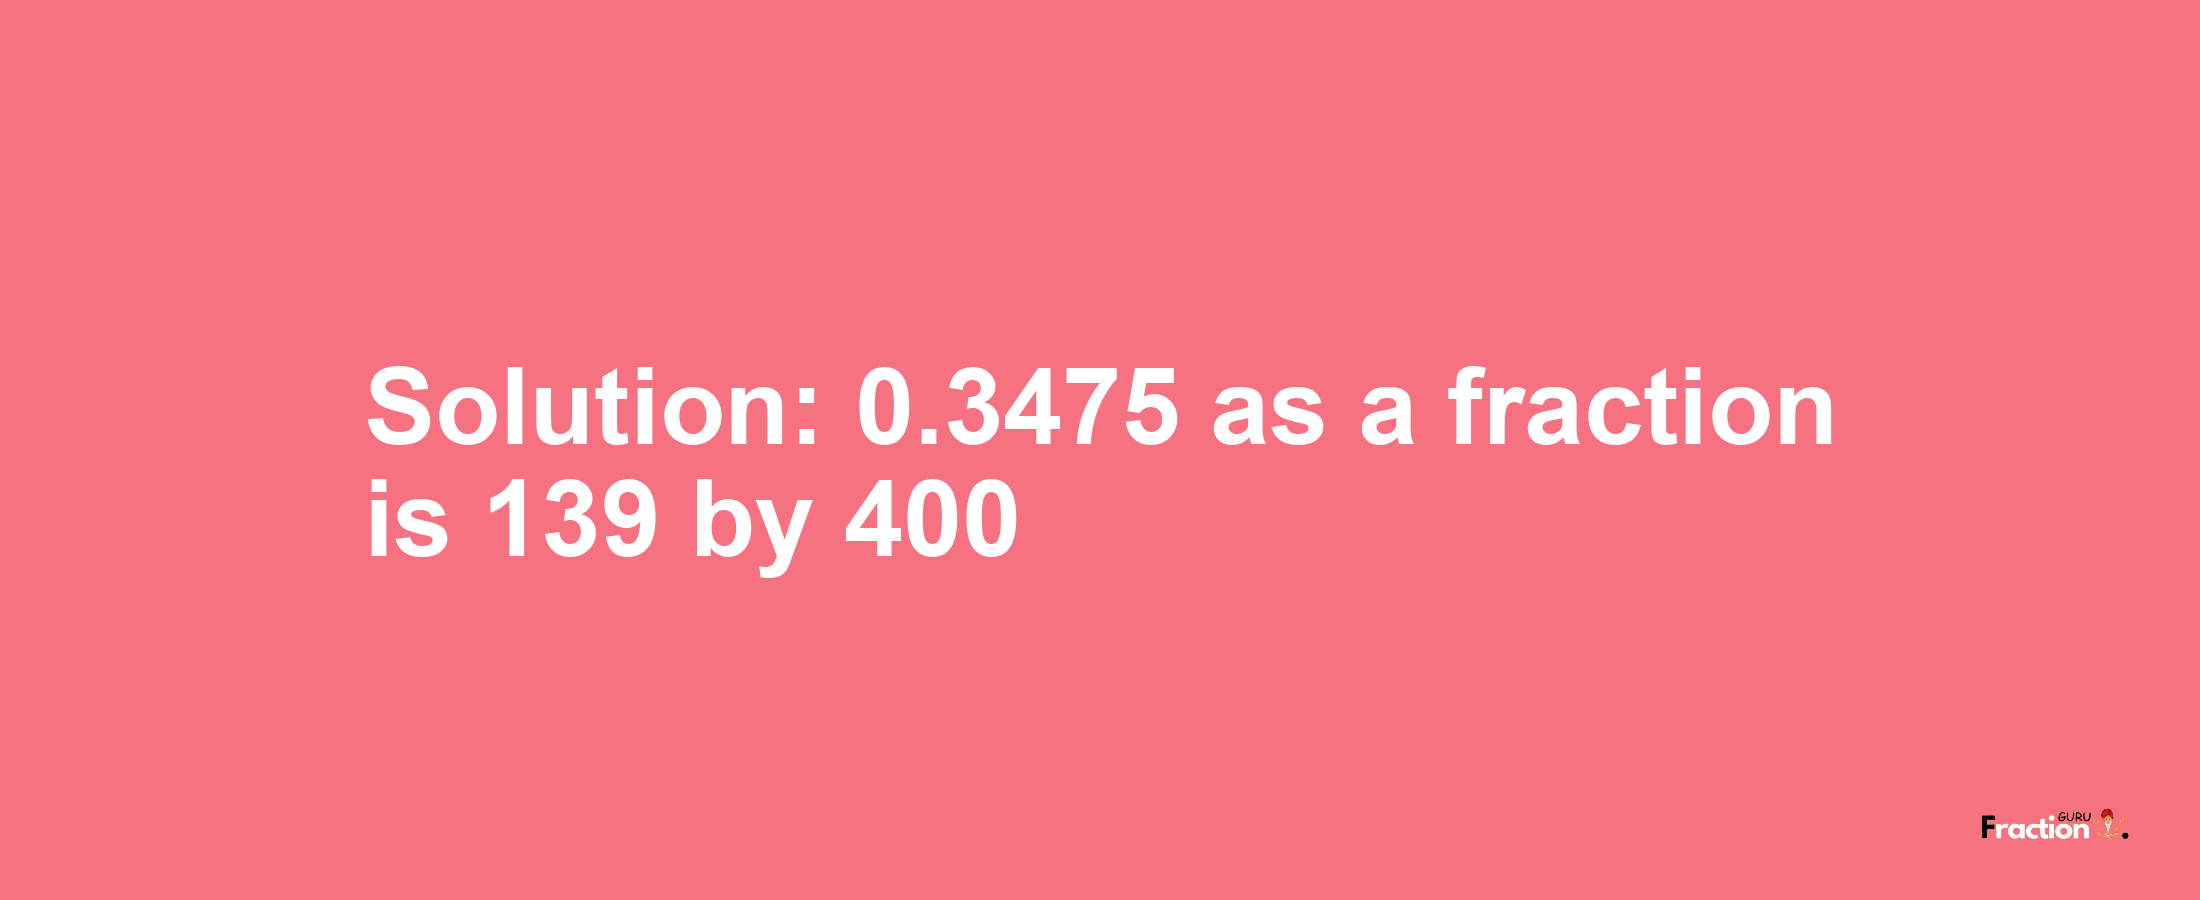 Solution:0.3475 as a fraction is 139/400